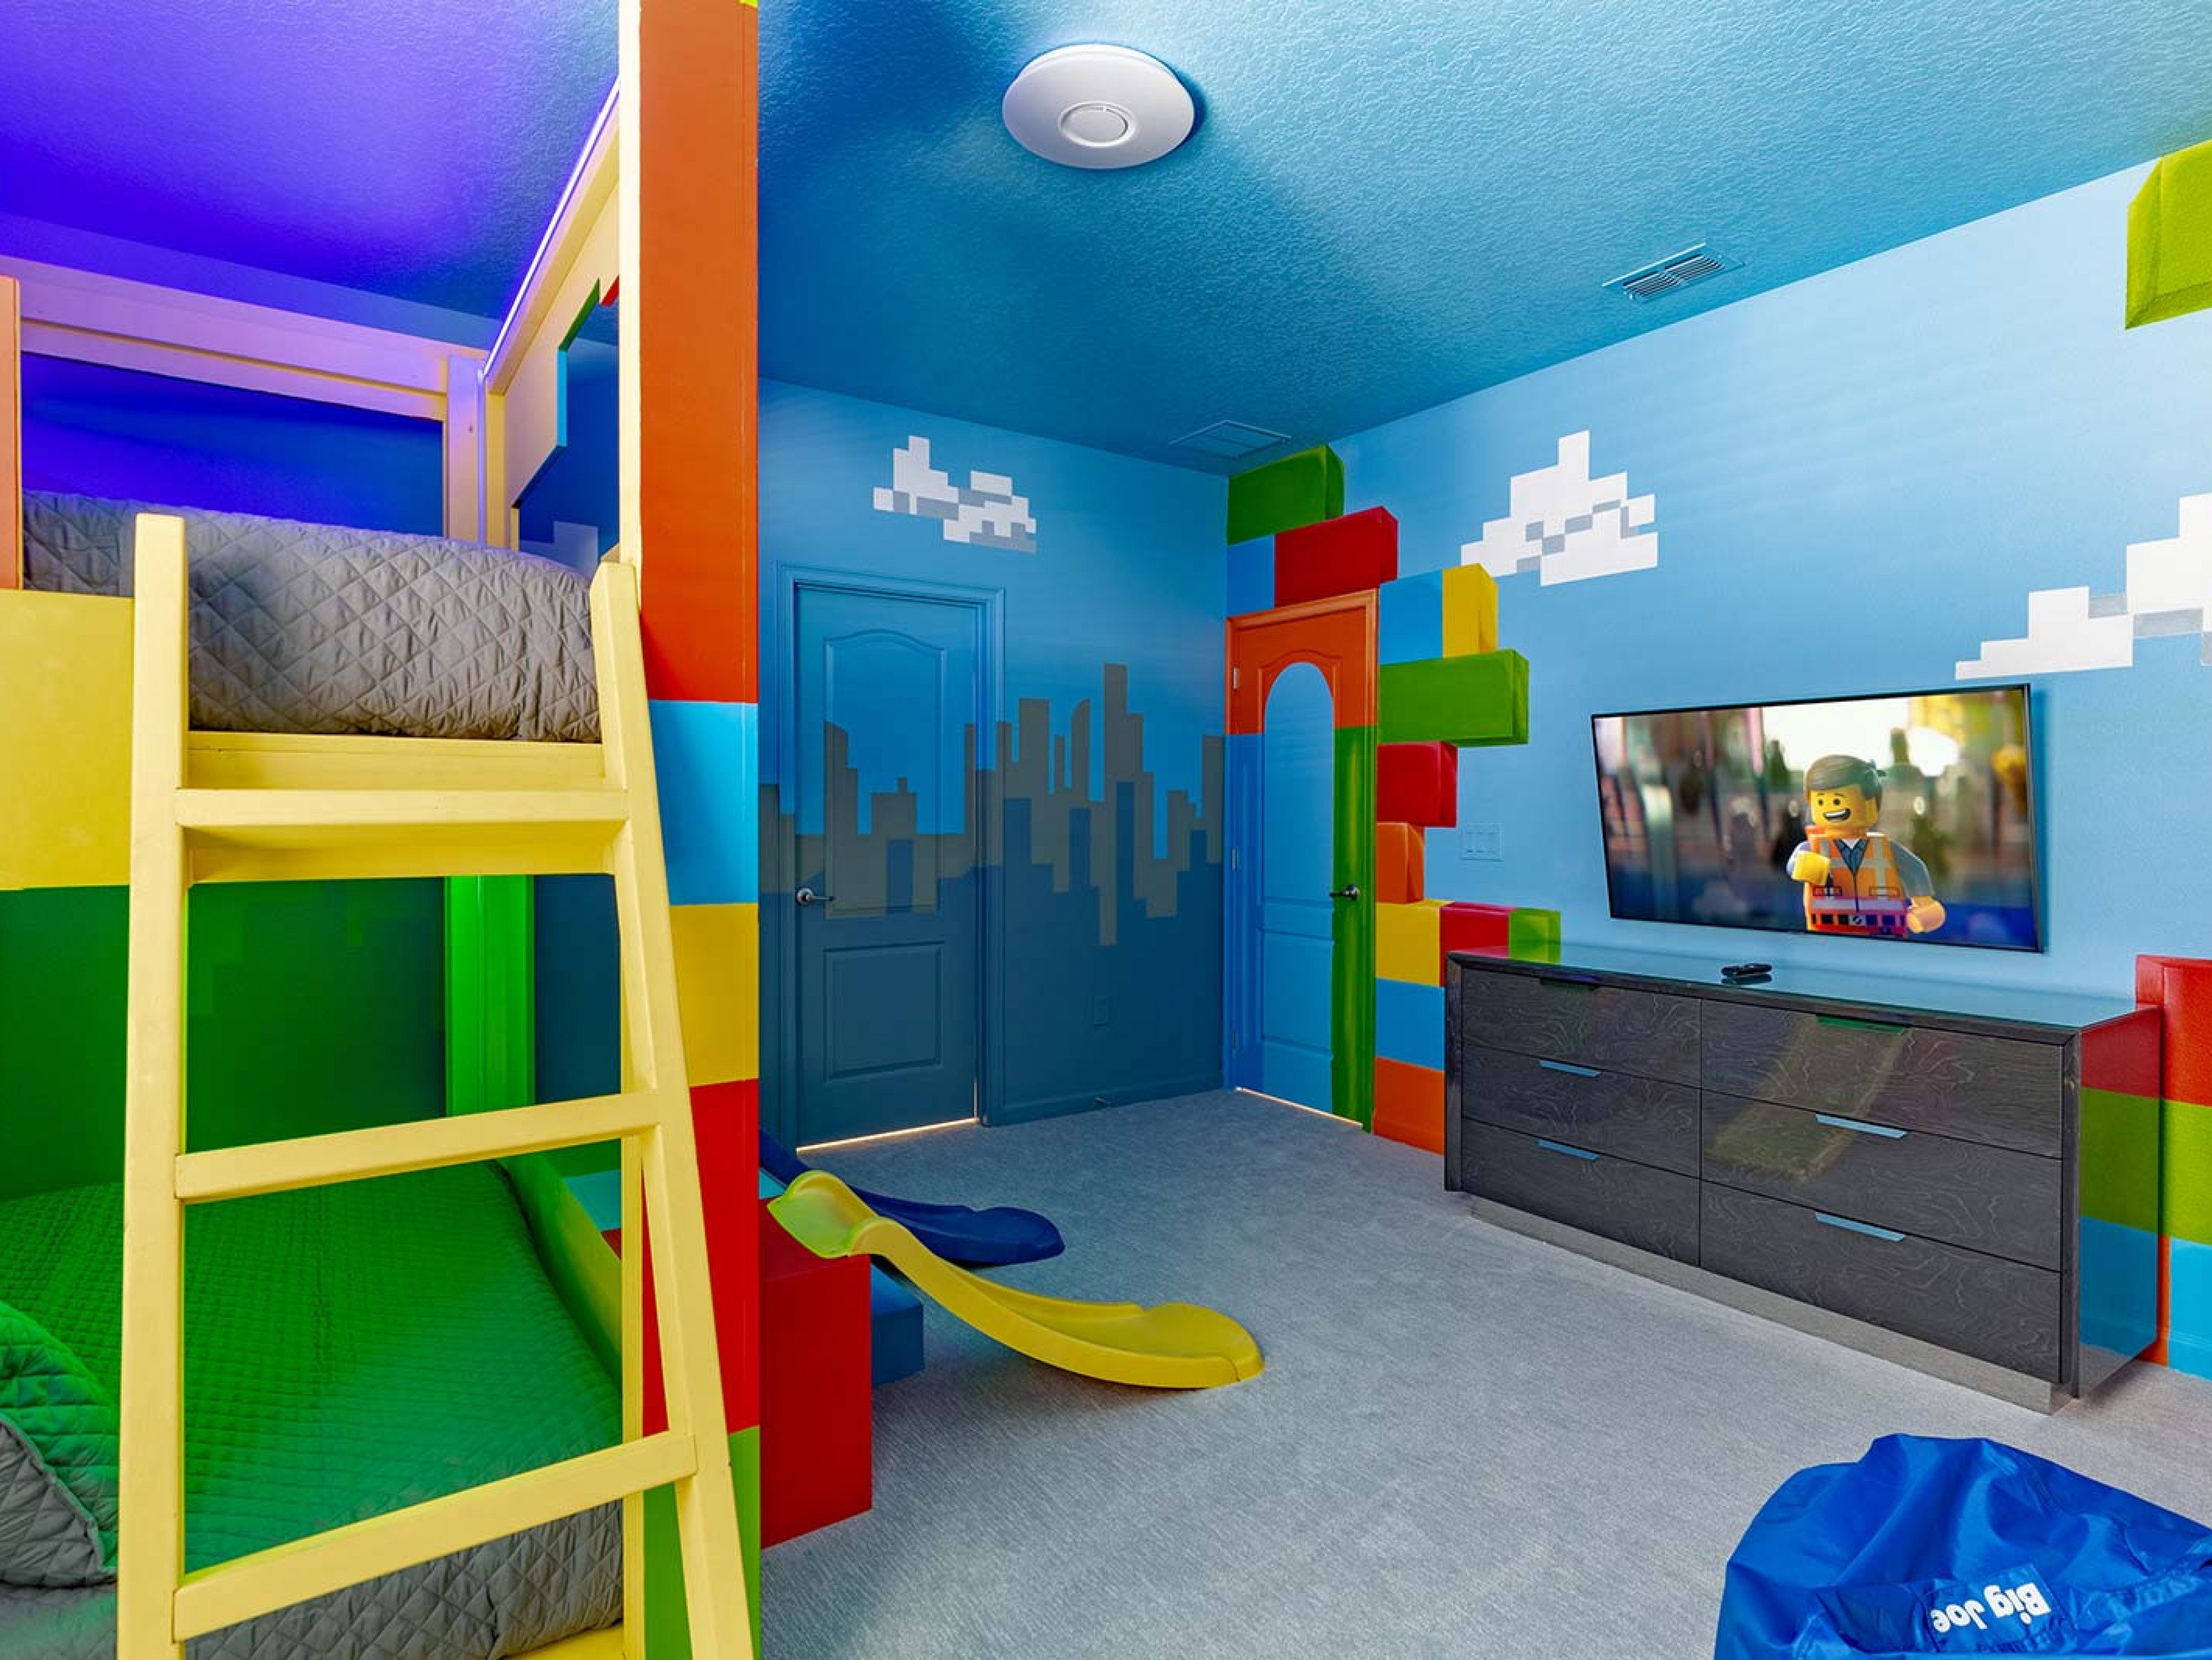  Orlando homes with Legoland-themed rooms - Solterra Resort 368